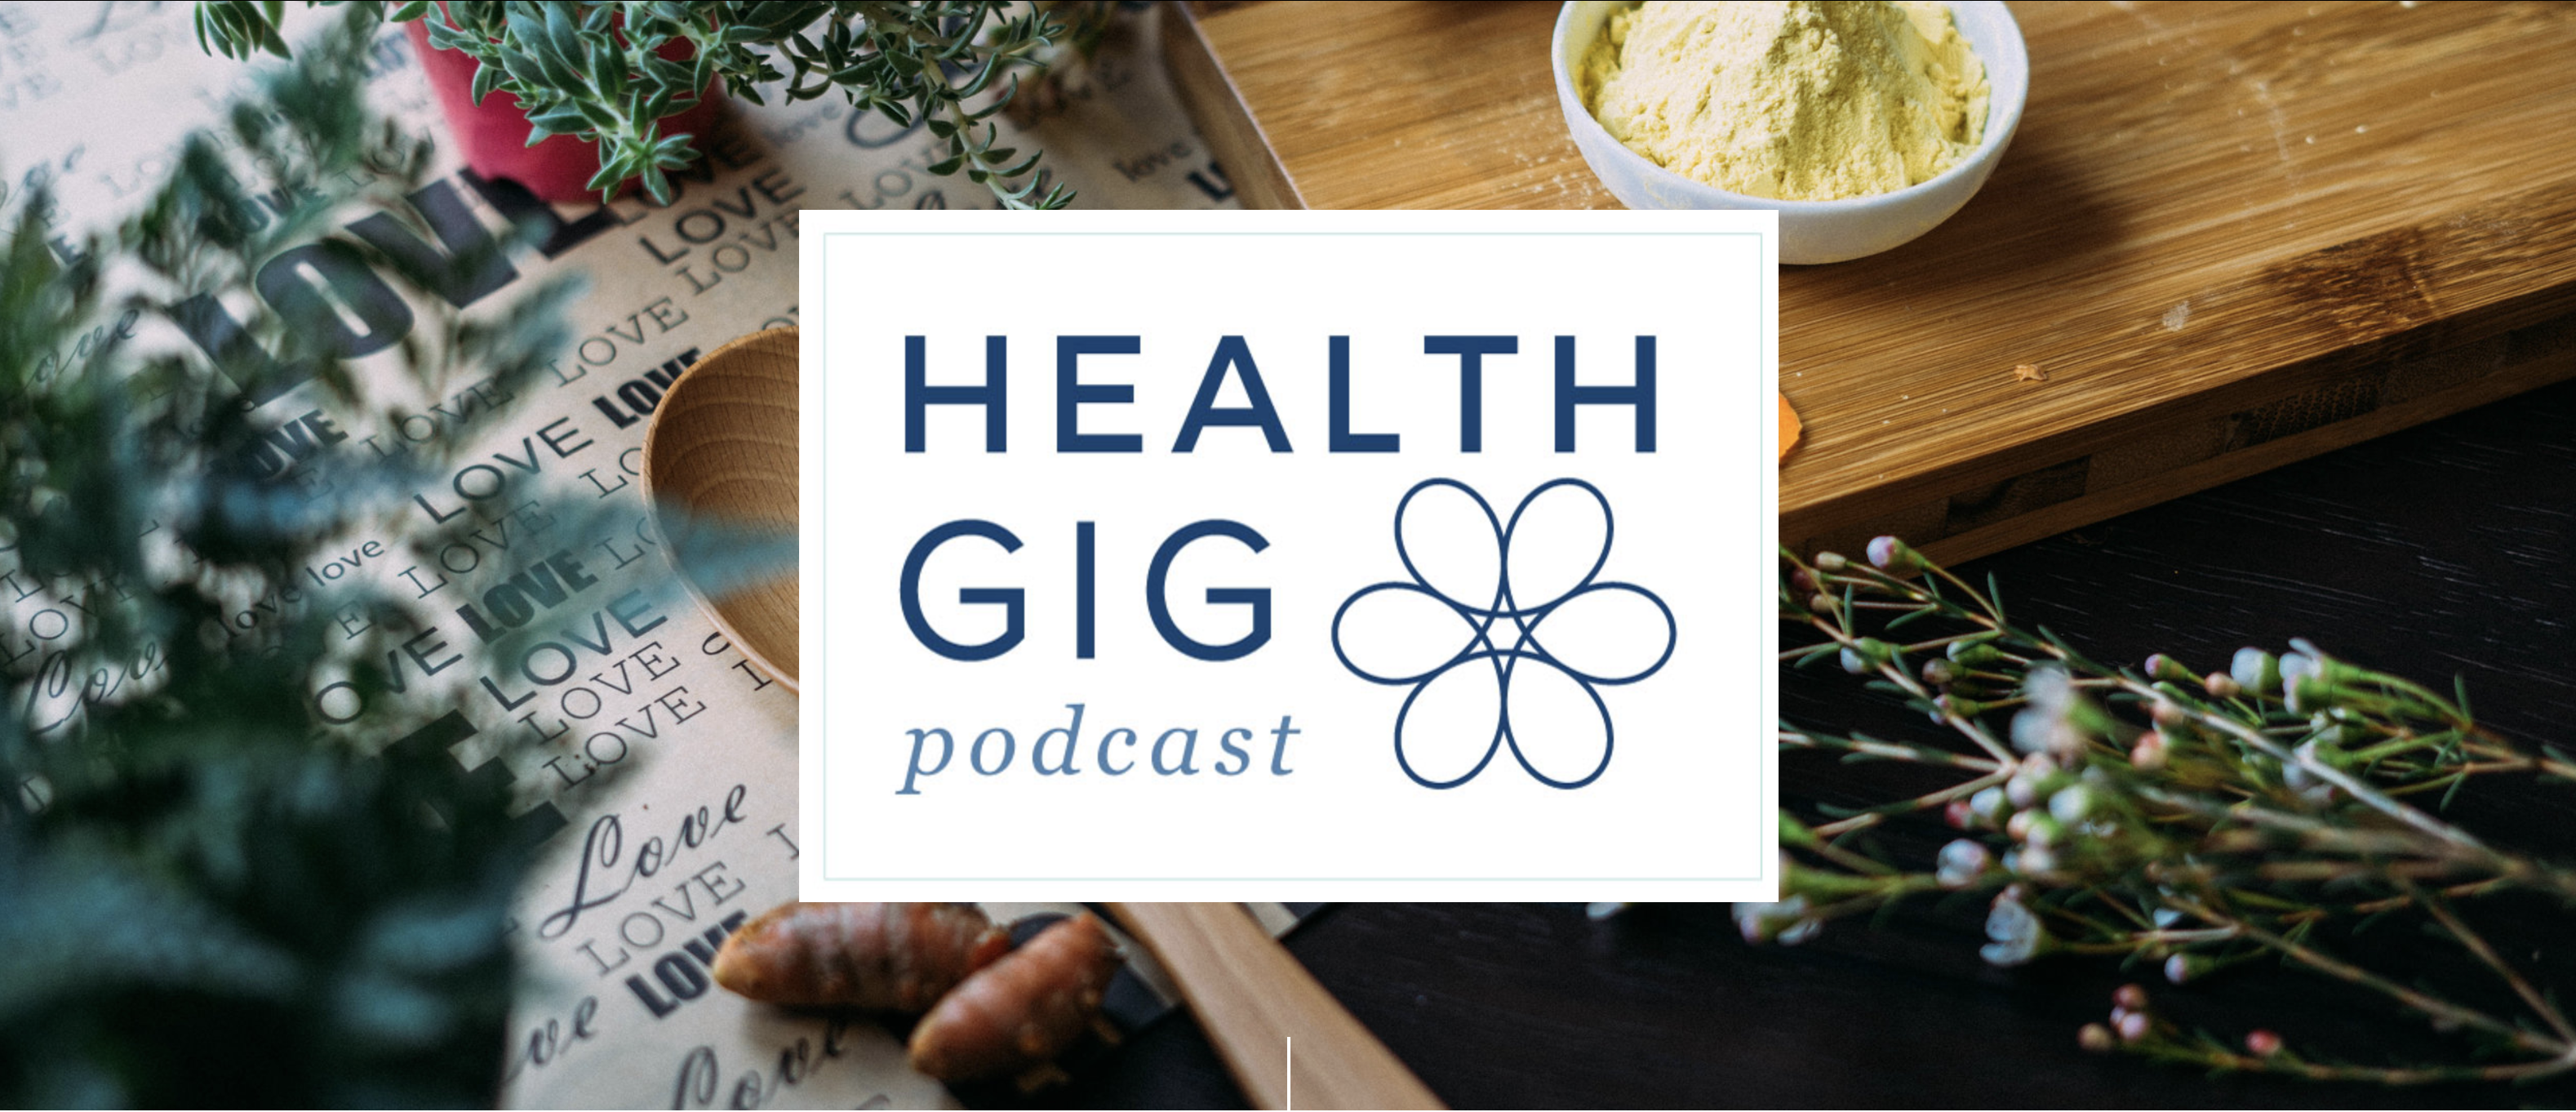 The Health Gig Podcast featuring longevity and Middlescence expert Barbara Waxman